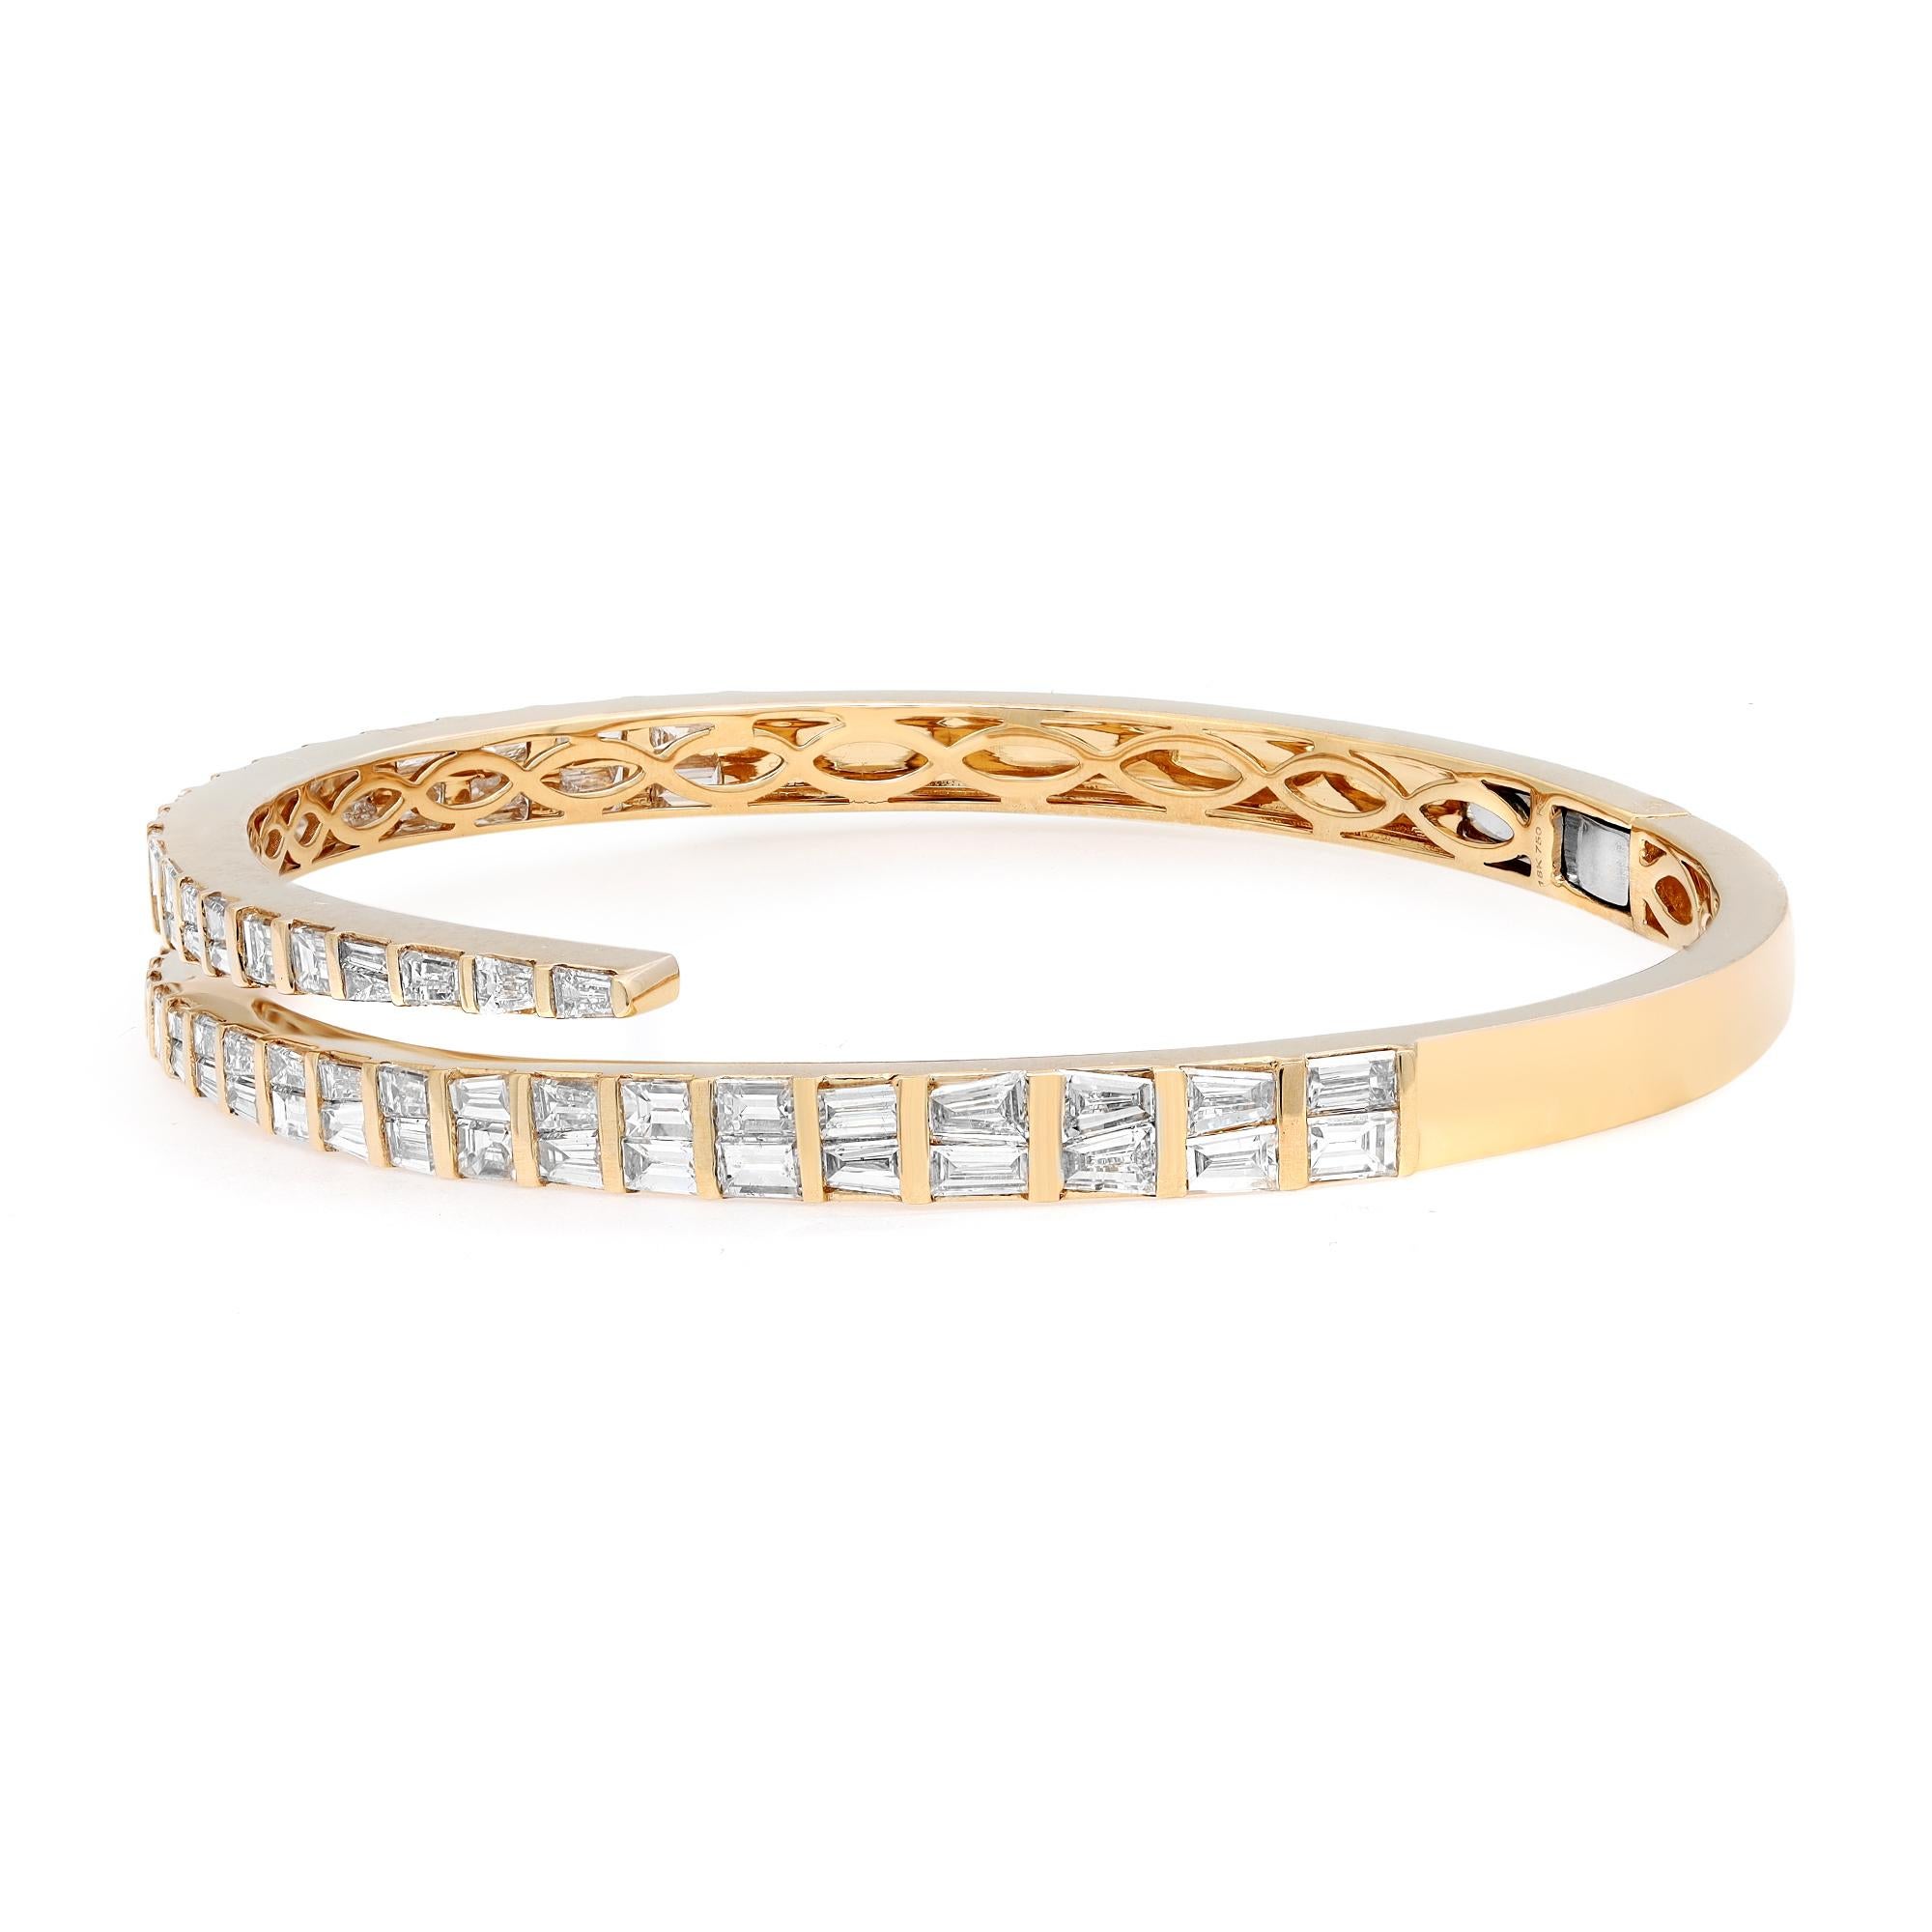 Let your style shine with this fancy and elegant diamond bangle bracelet. Crafted in 18k yellow gold. This stunning bracelet features 74 channel set tapered baguette cut shimmering diamonds with a total weight of 4.27 carats. Diamond color G-H and